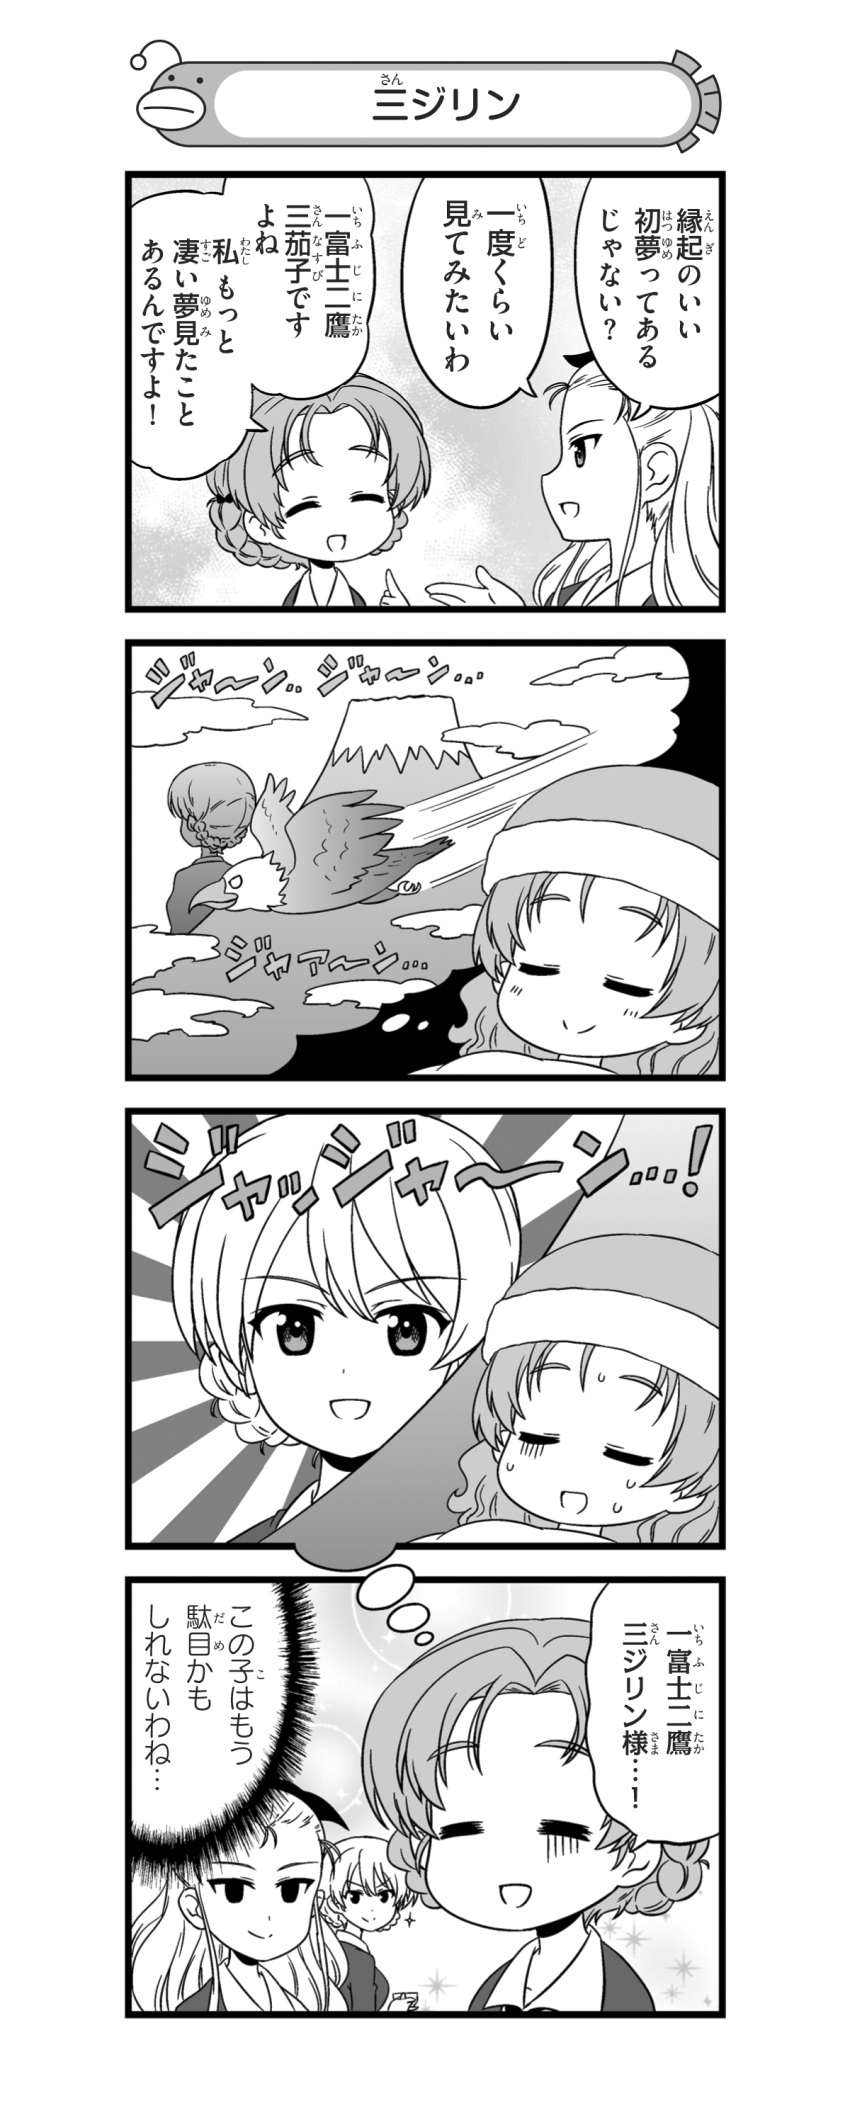 3girls 4koma :d absurdres alternate_hairstyle assam bangs bird bow braid closed_mouth cloud comic cup darjeeling dreaming dress_shirt eagle empty_eyes eyebrows_visible_through_hair eyes_closed gesture girls_und_panzer gloom_(expression) greyscale hair_bow hair_down hair_pulled_back hair_ribbon hat hatsuyume highres holding holding_cup holding_saucer light_blush long_hair long_sleeves monochrome mount_fuji multiple_girls nanashiro_gorou necktie nightcap official_art open_mouth orange_pekoe parted_bangs pdf_available ribbon rising_sun school_uniform shirt short_hair sleeping smile st._gloriana's_school_uniform sunburst sweatdrop sweater teacup thought_bubble tied_hair twin_braids wing_collar